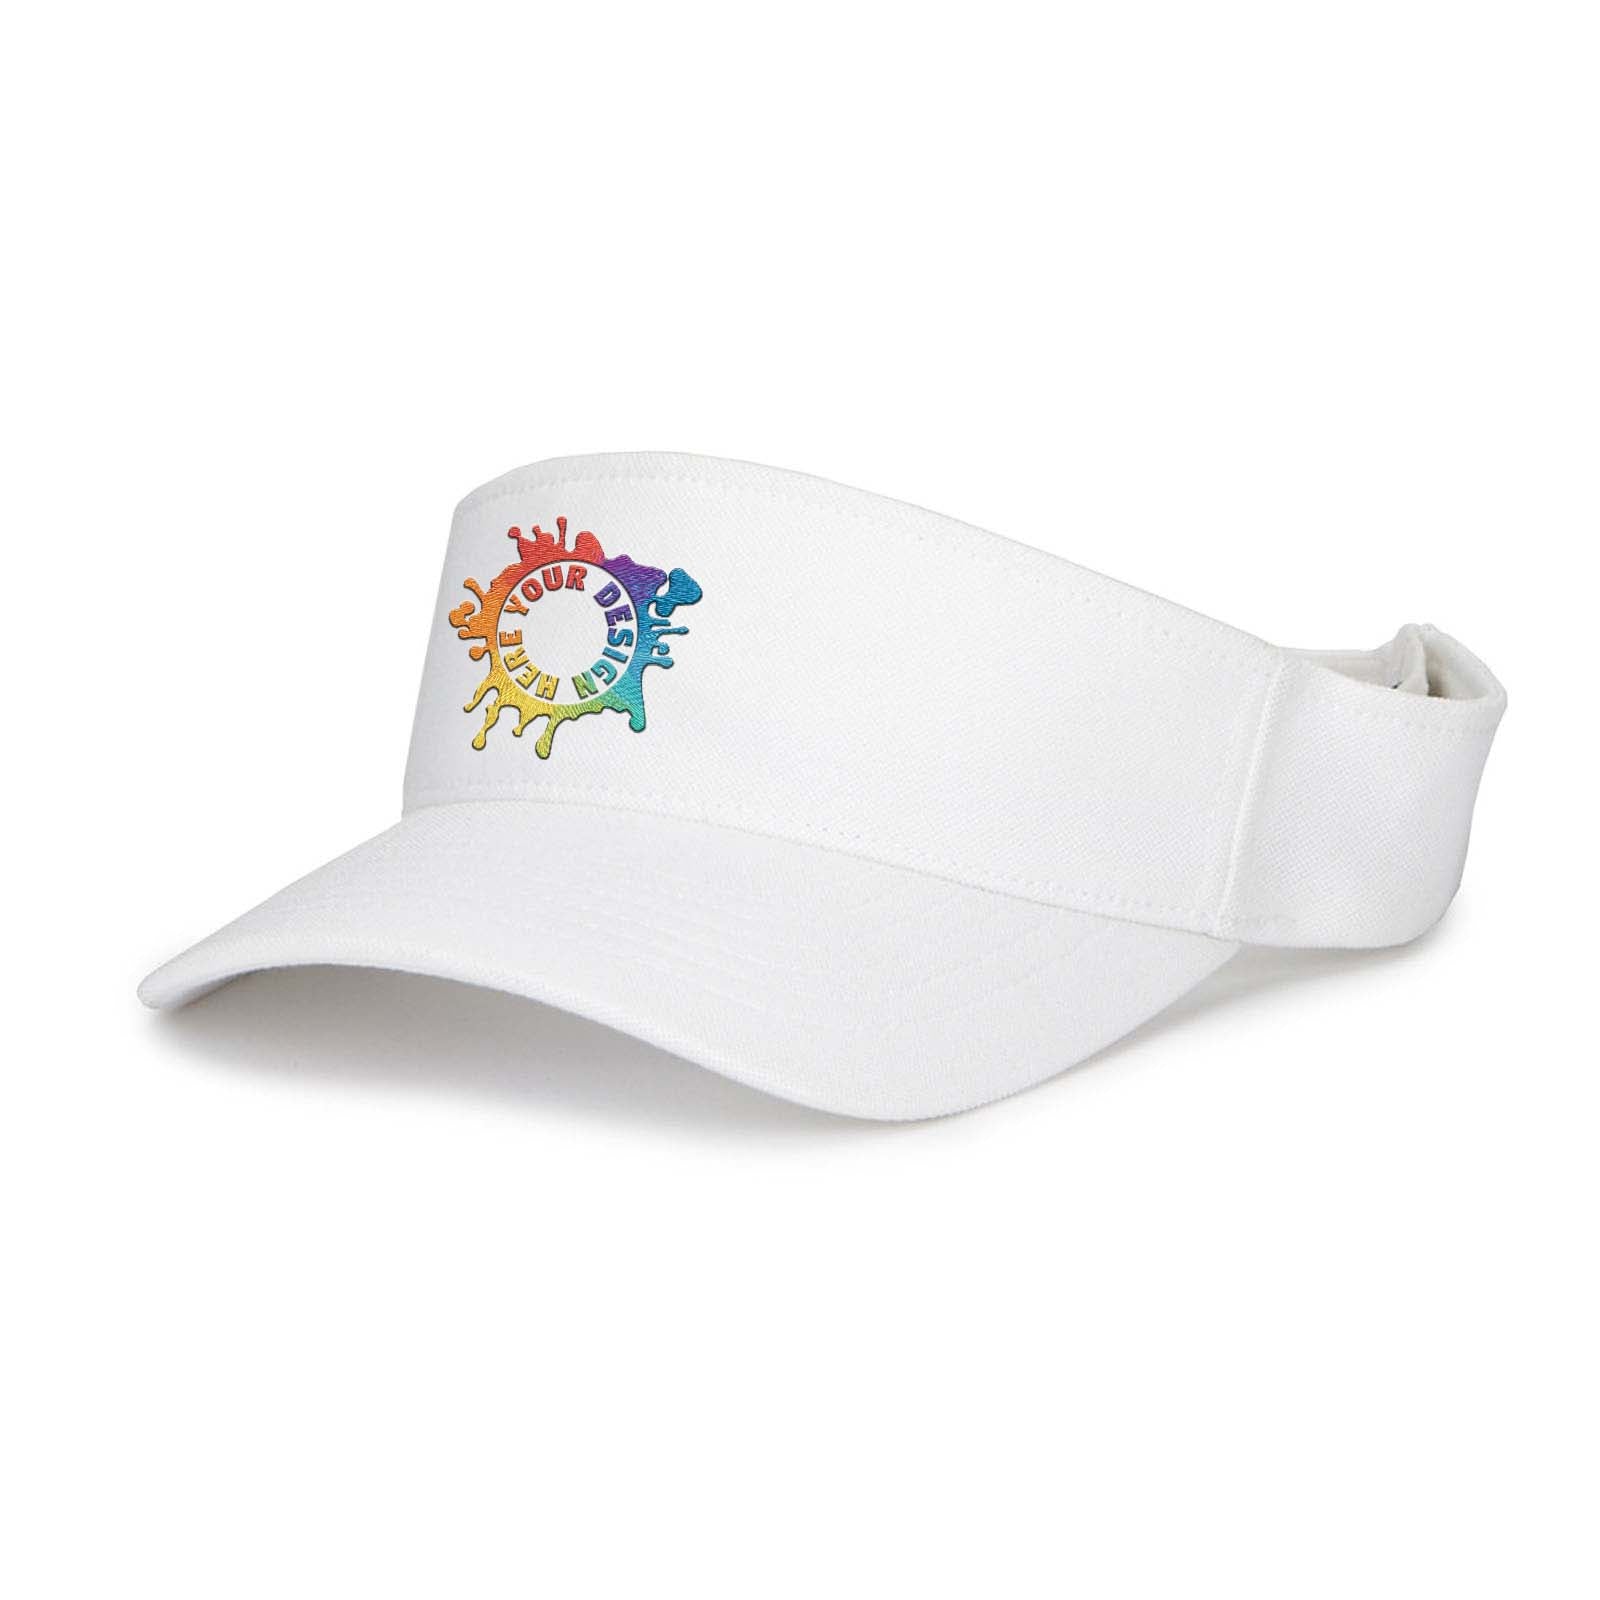 Embroidered Flexfit Adult Cool & Dry Visor - Mato & Hash